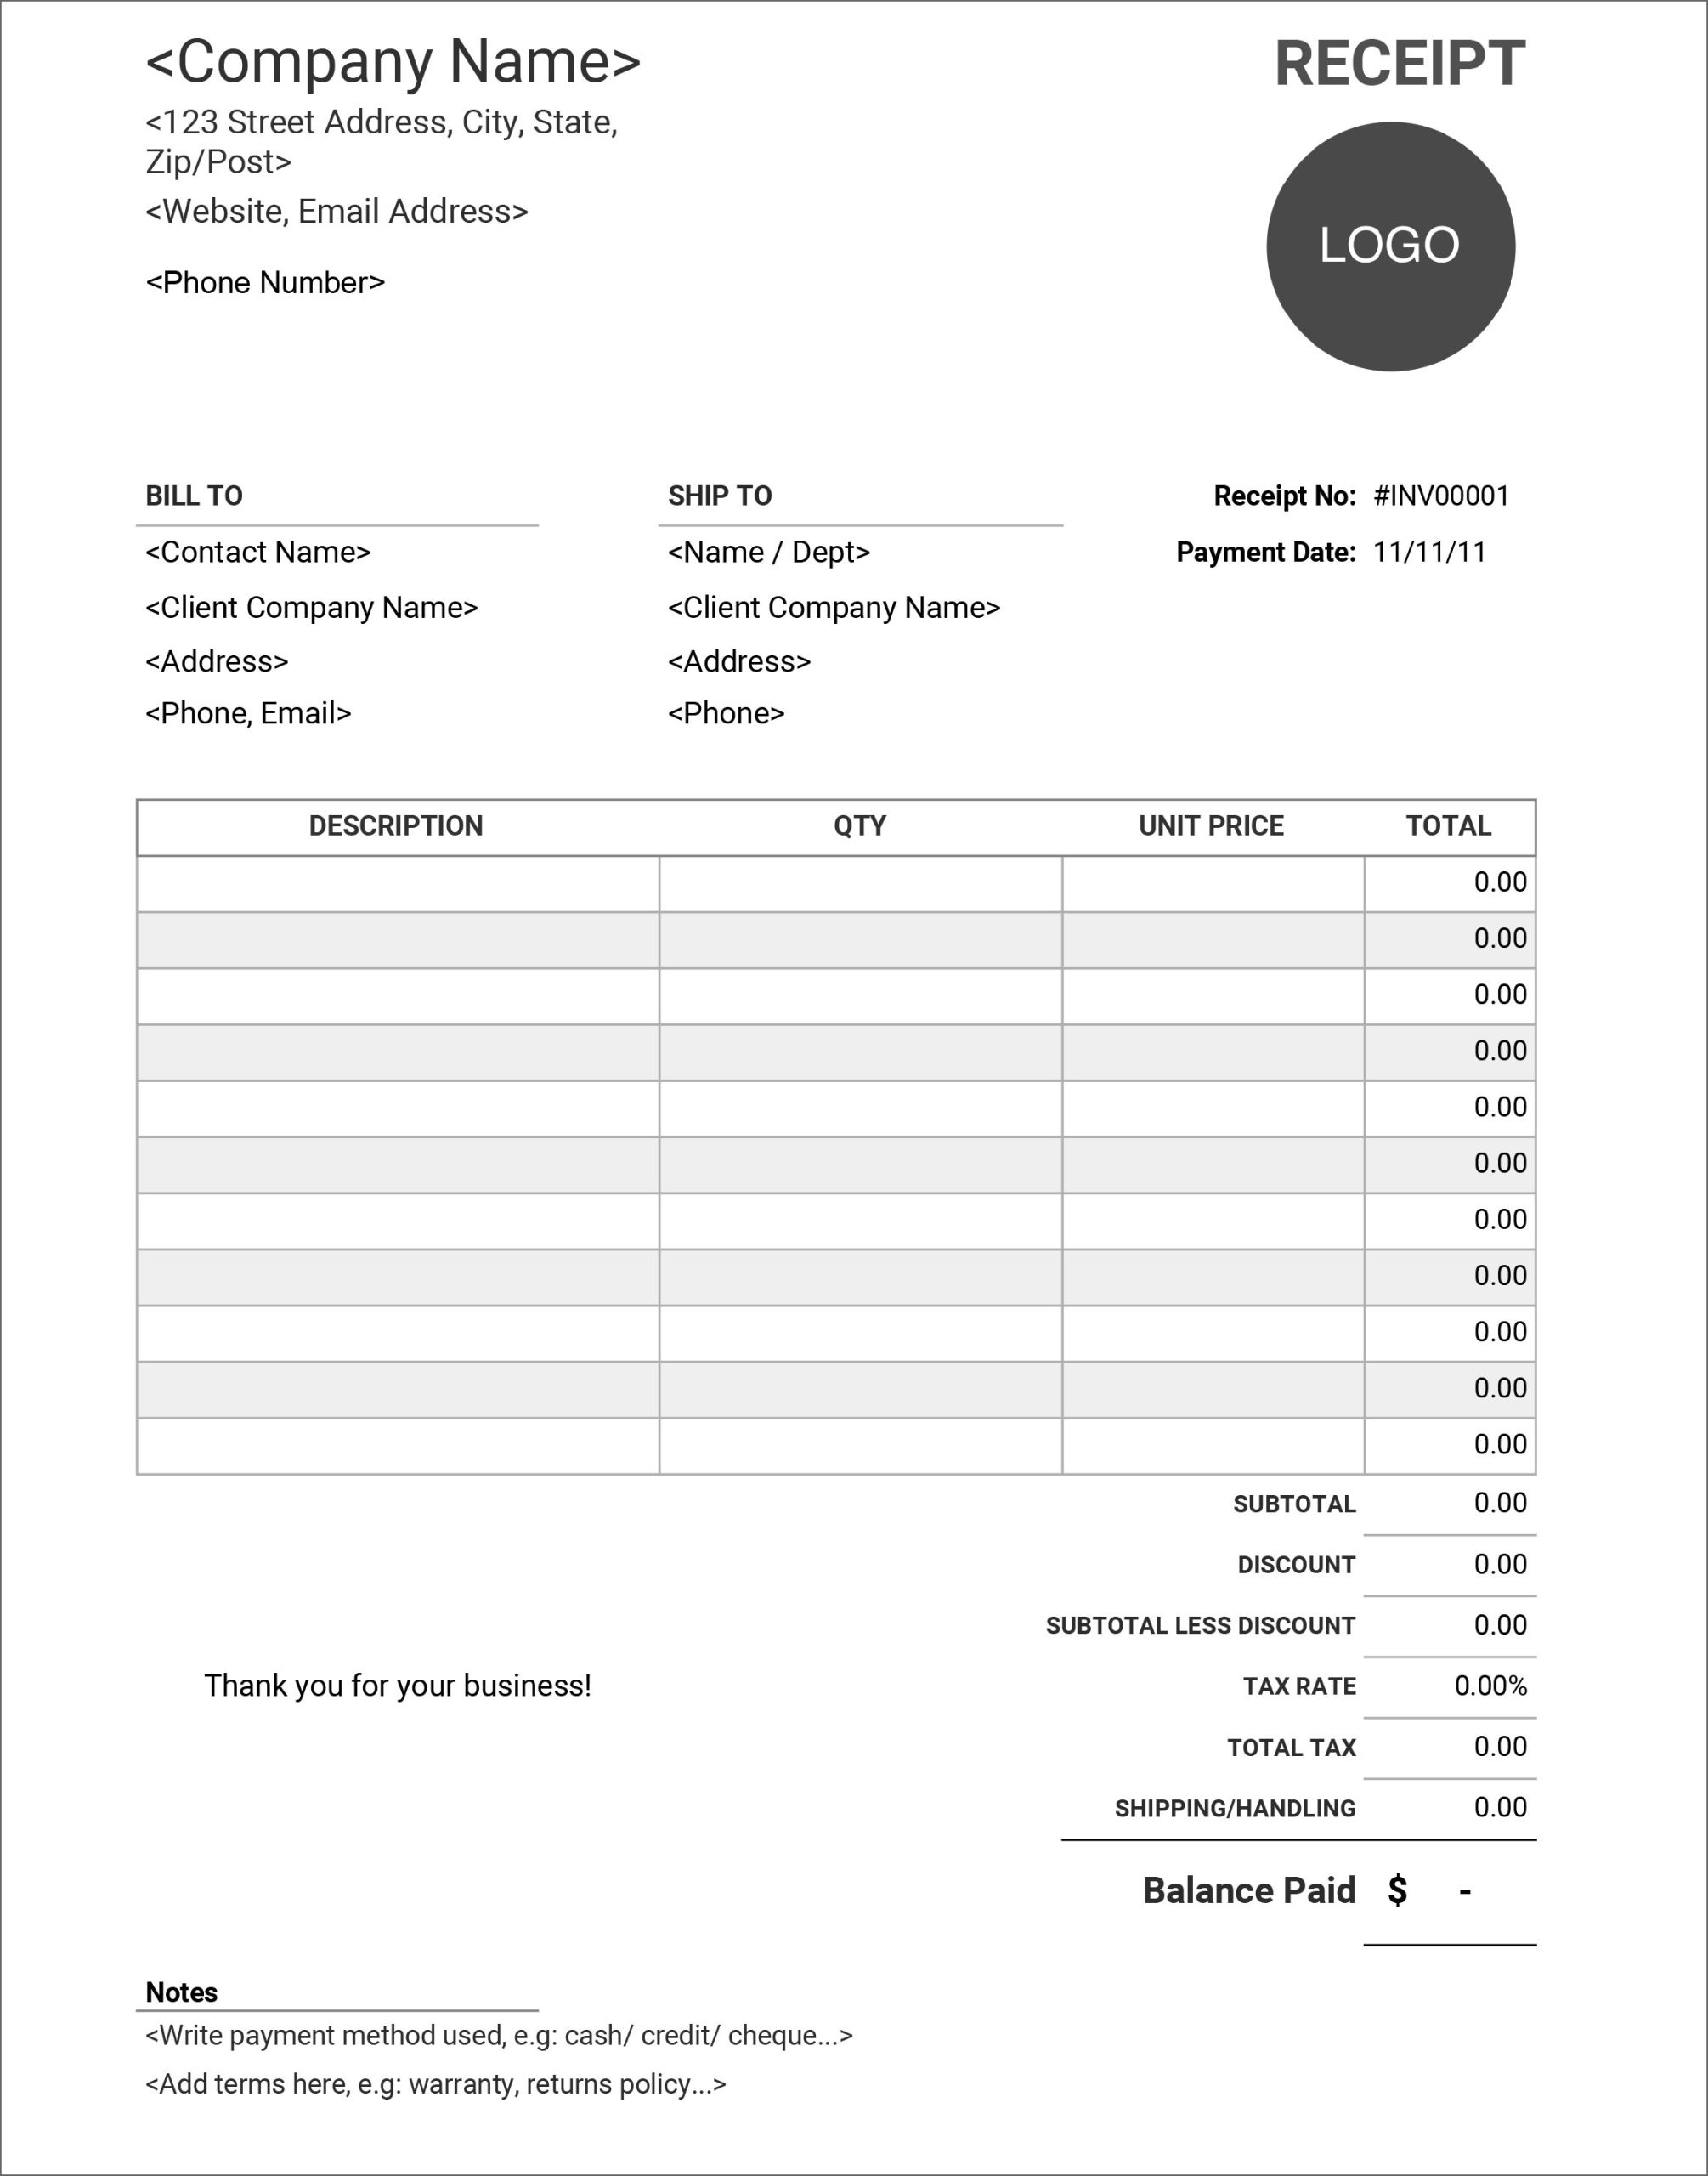 16 Free Receipt Templates - Download For Microsoft Word, Excel, And With Regard To Google Word Document Templates